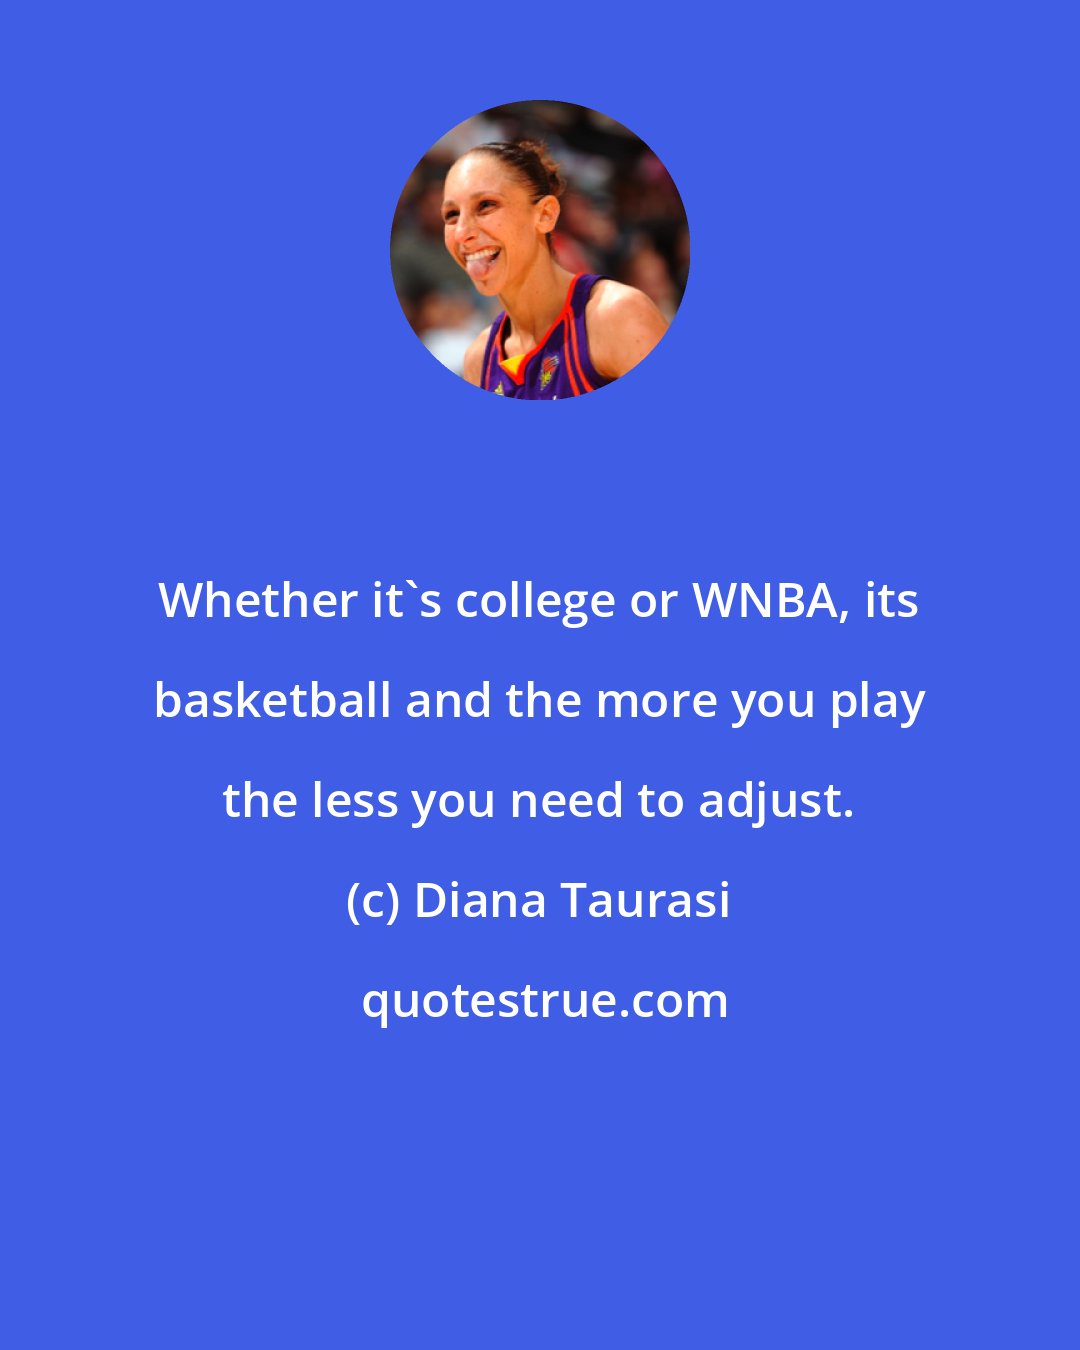 Diana Taurasi: Whether it's college or WNBA, its basketball and the more you play the less you need to adjust.